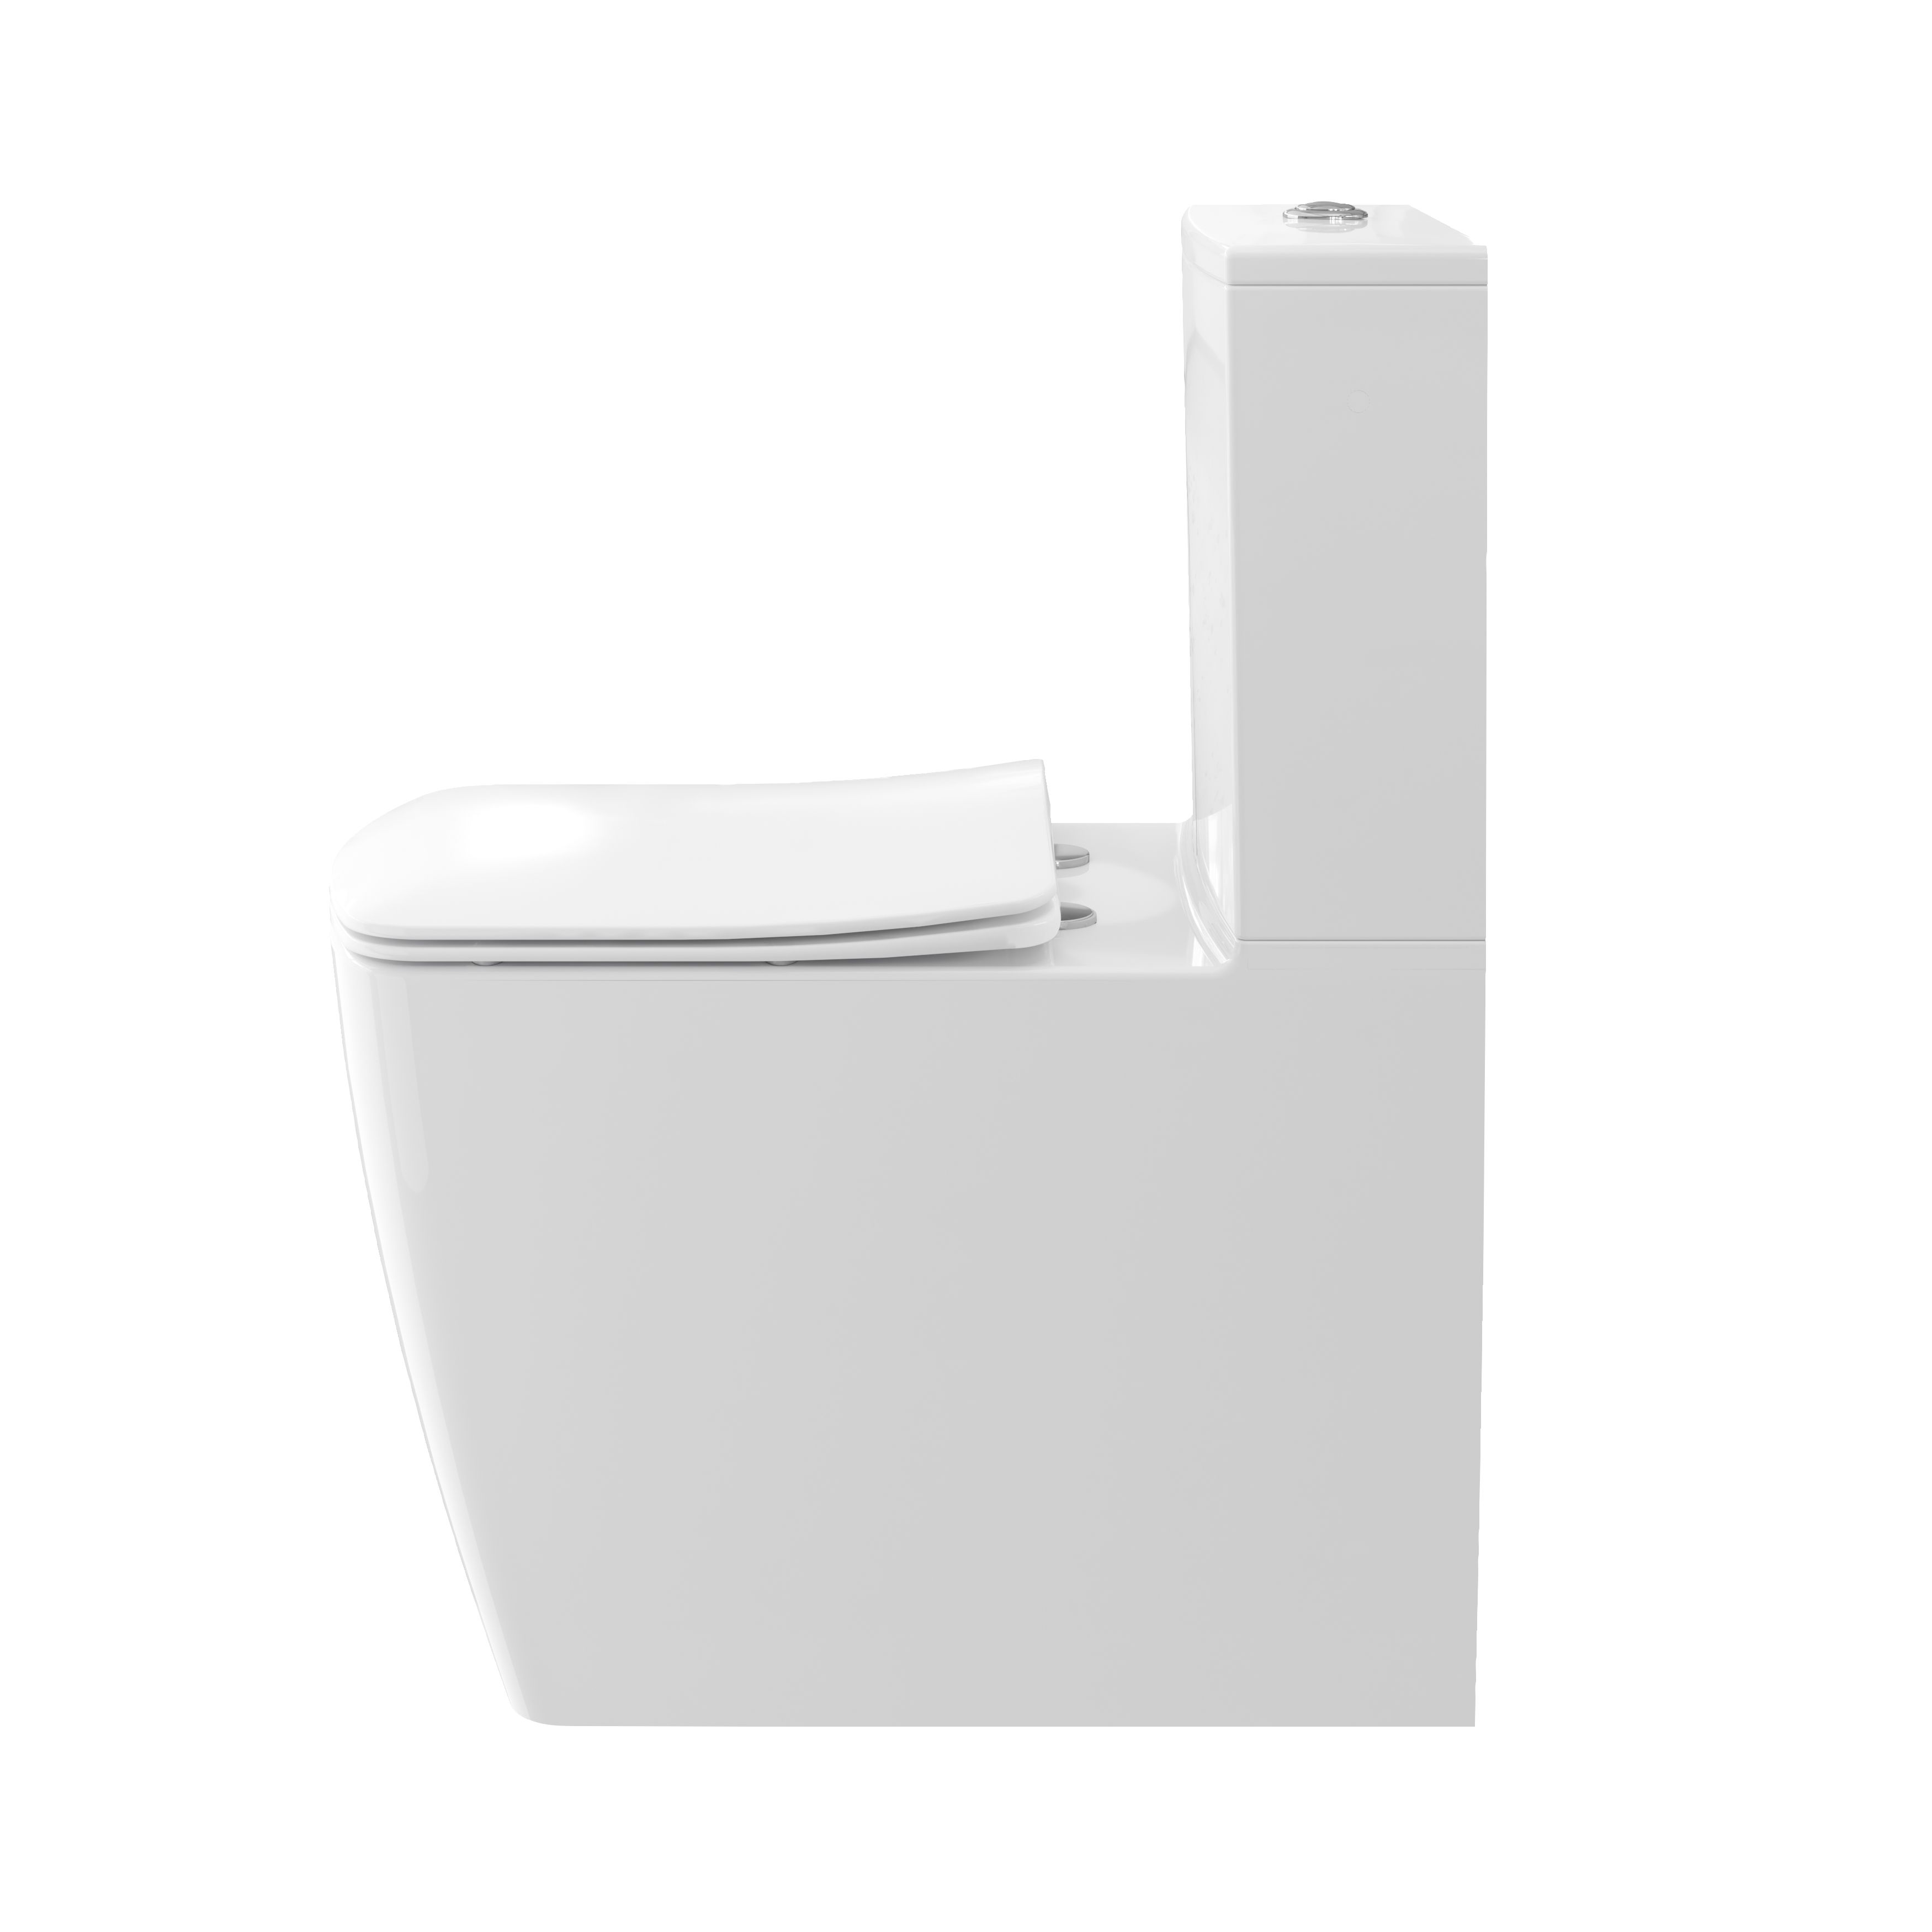 GoodHome Levanna White Close-coupled Square Toilet & cistern with Soft close seat